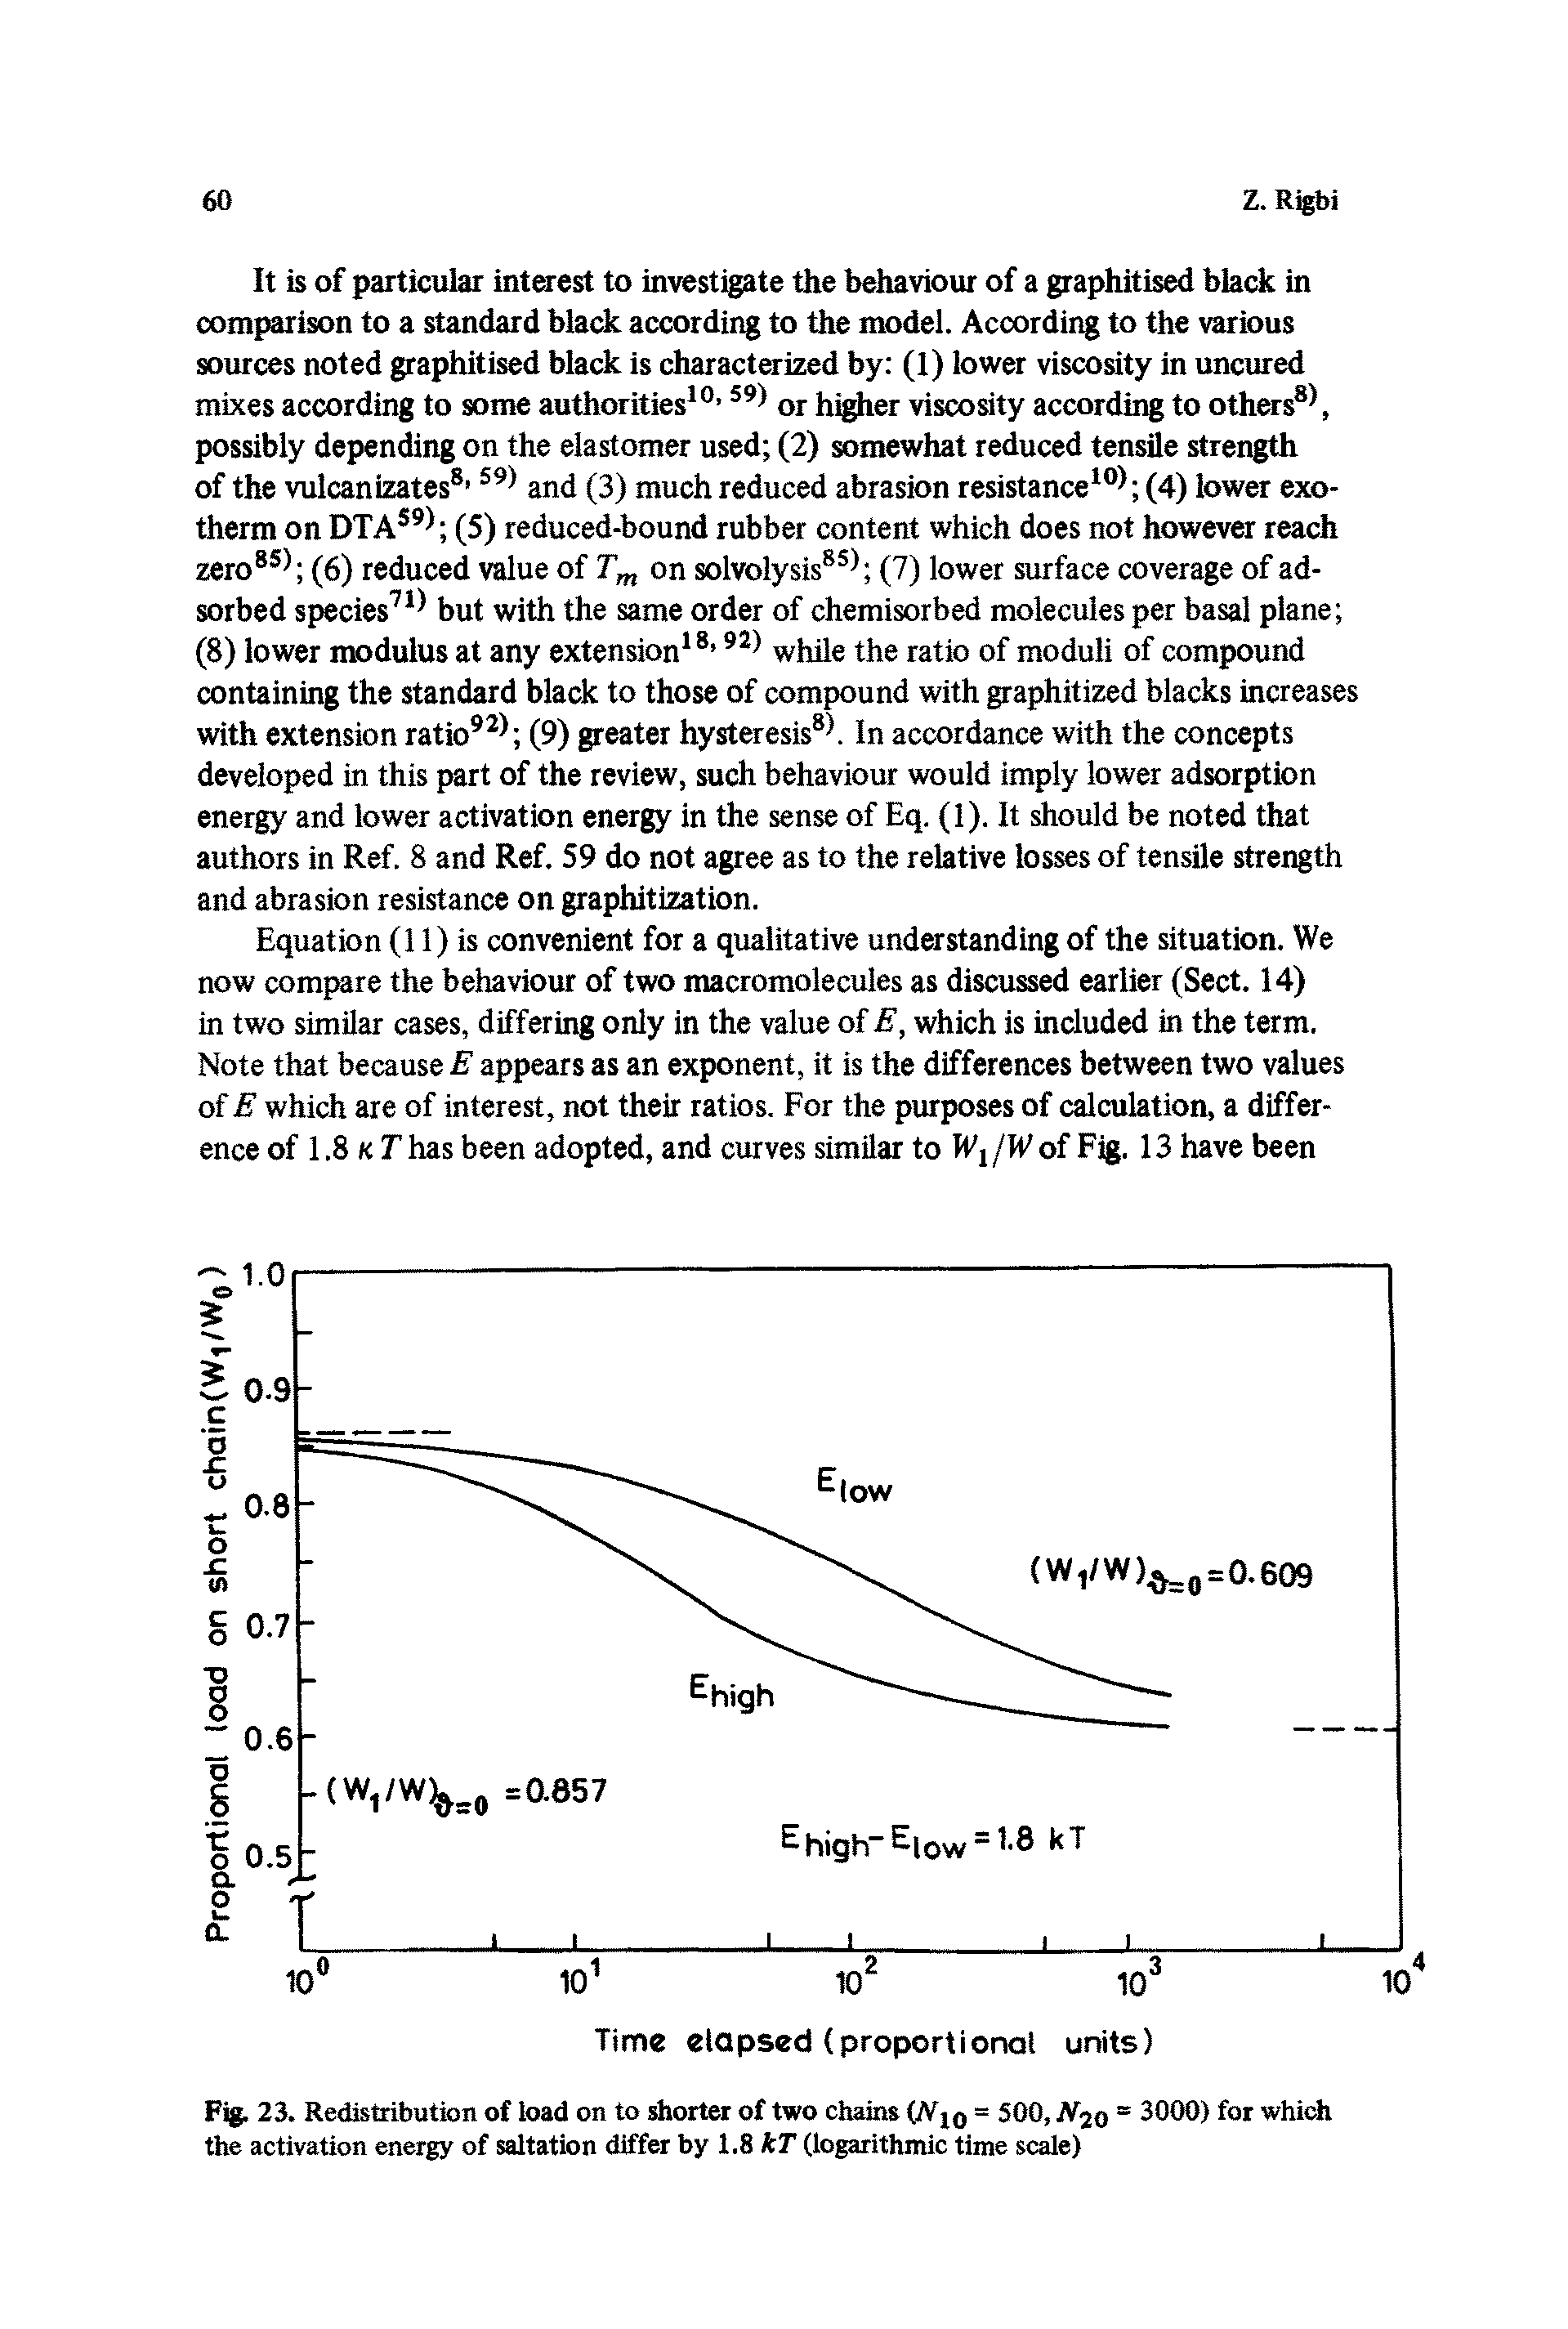 Fig. 23. Redistribution of load on to shorter of two chains (Ar10 = 500, JVjo = 3000) for which the activation energy of saltation differ by 1.8 kT (logarithmic time scale)...